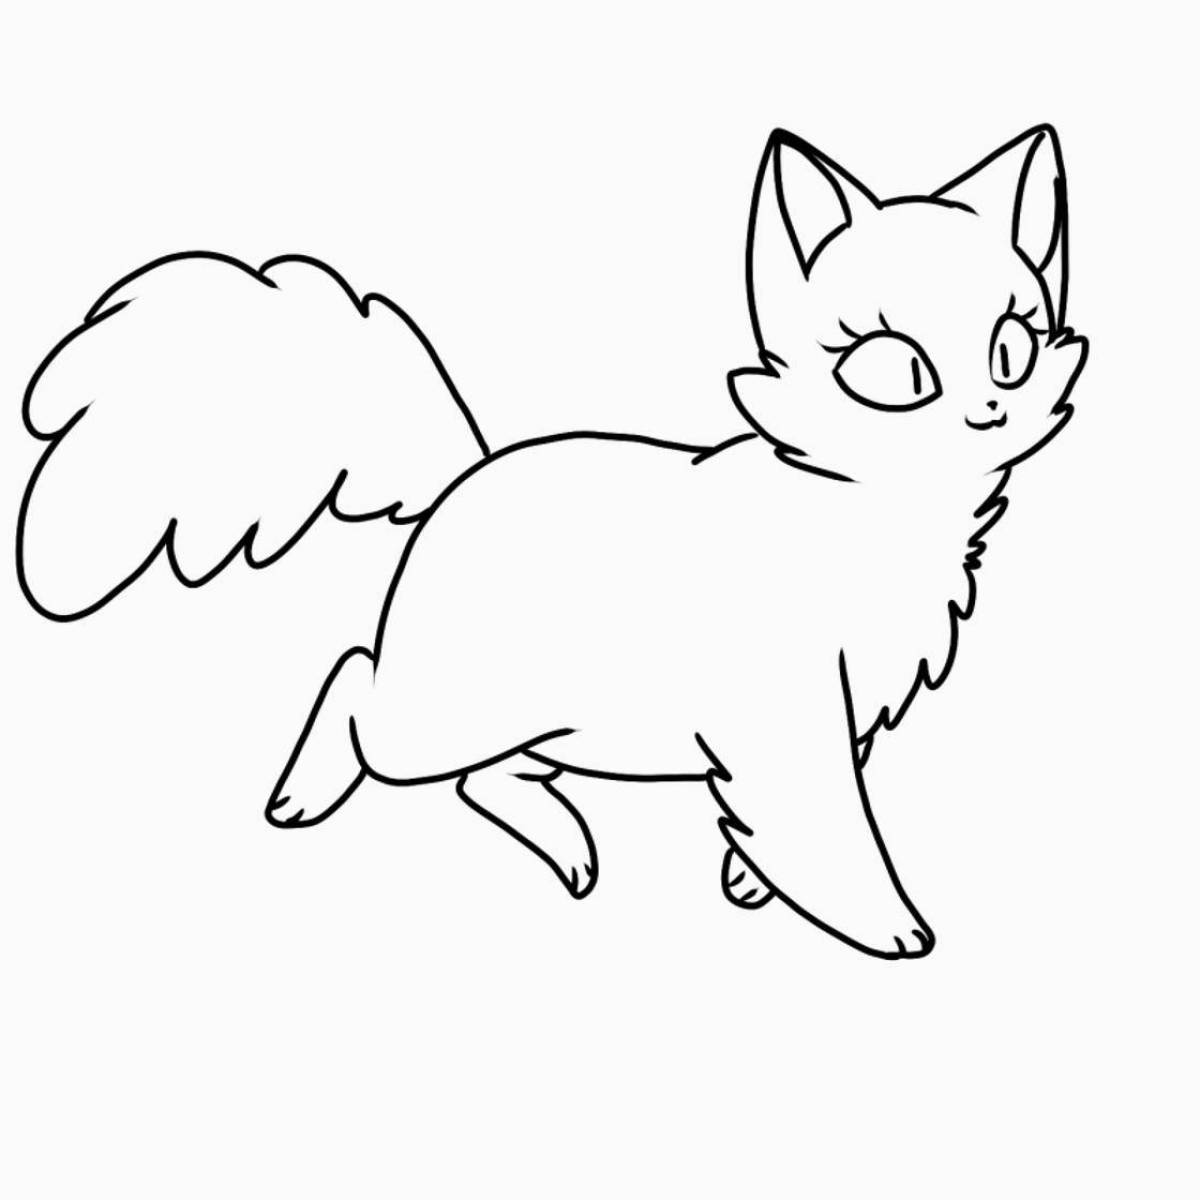 Coloring page joyful flying cat